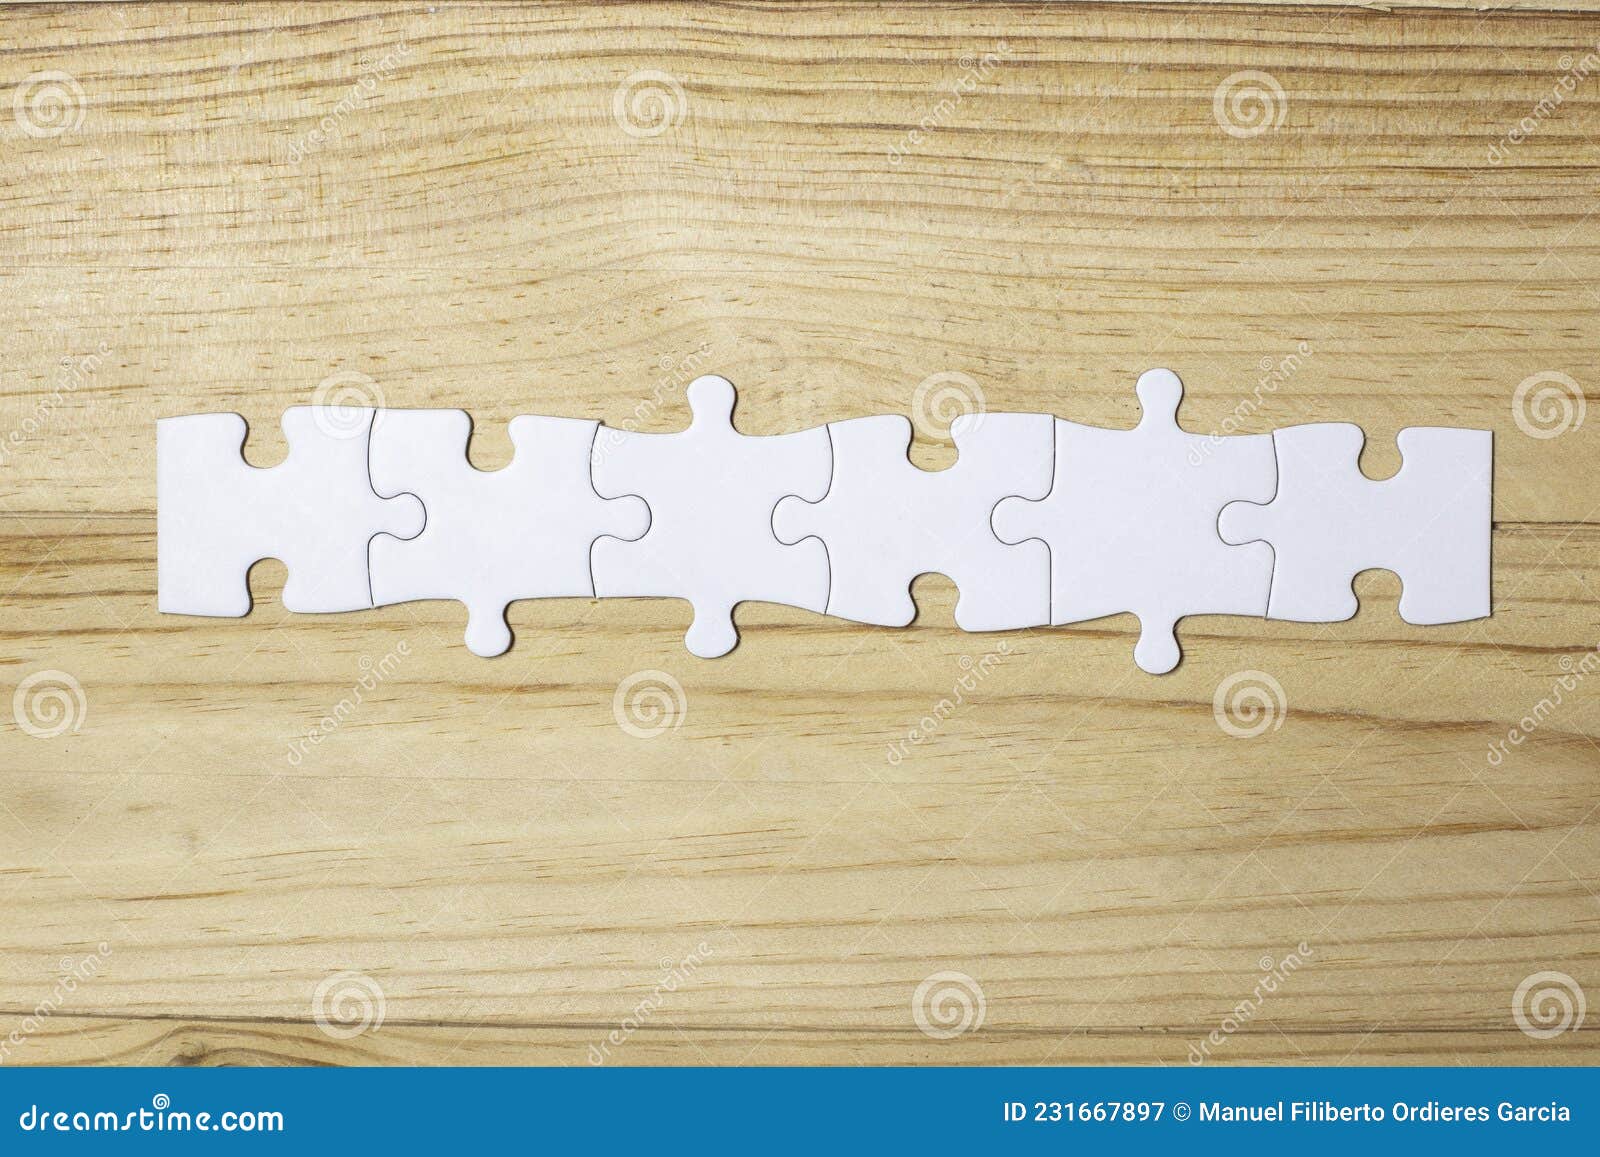 370+ 6 Puzzle Pieces Stock Photos, Pictures & Royalty-Free Images